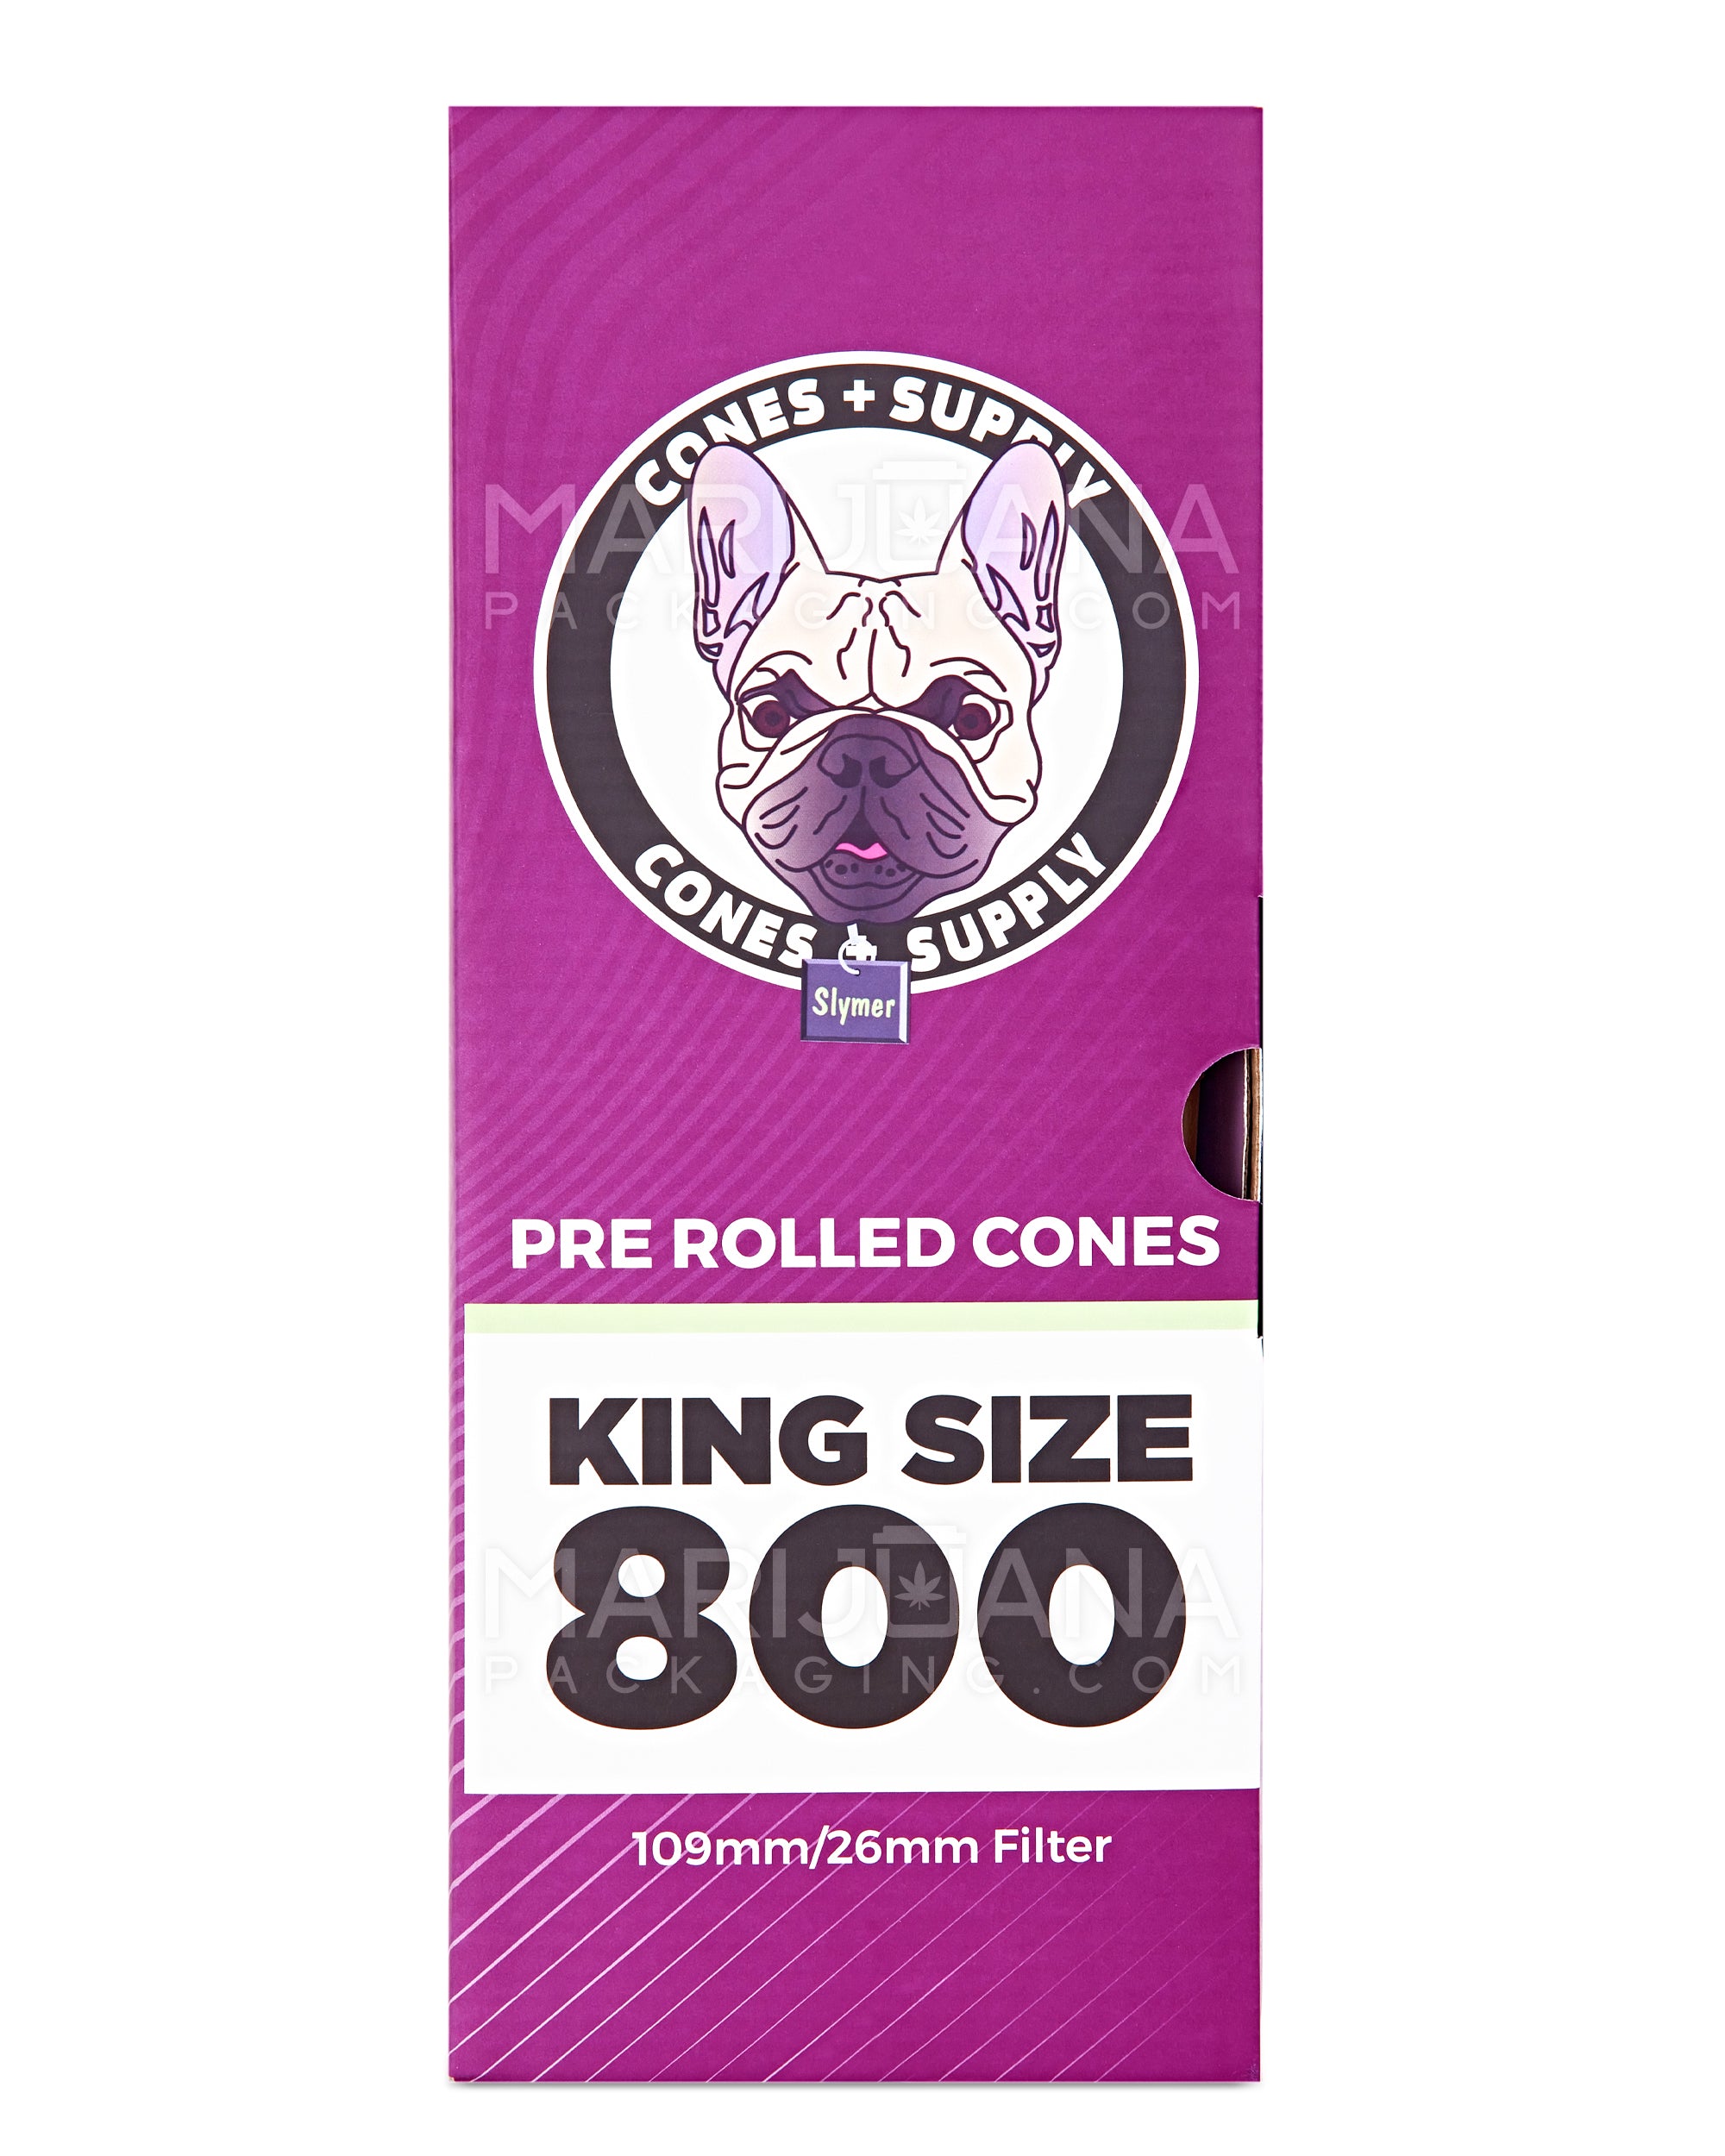 CONES + SUPPLY | Natural Pre-Rolled Cones | 109mm - Unbleached Paper - 800 Count - 5